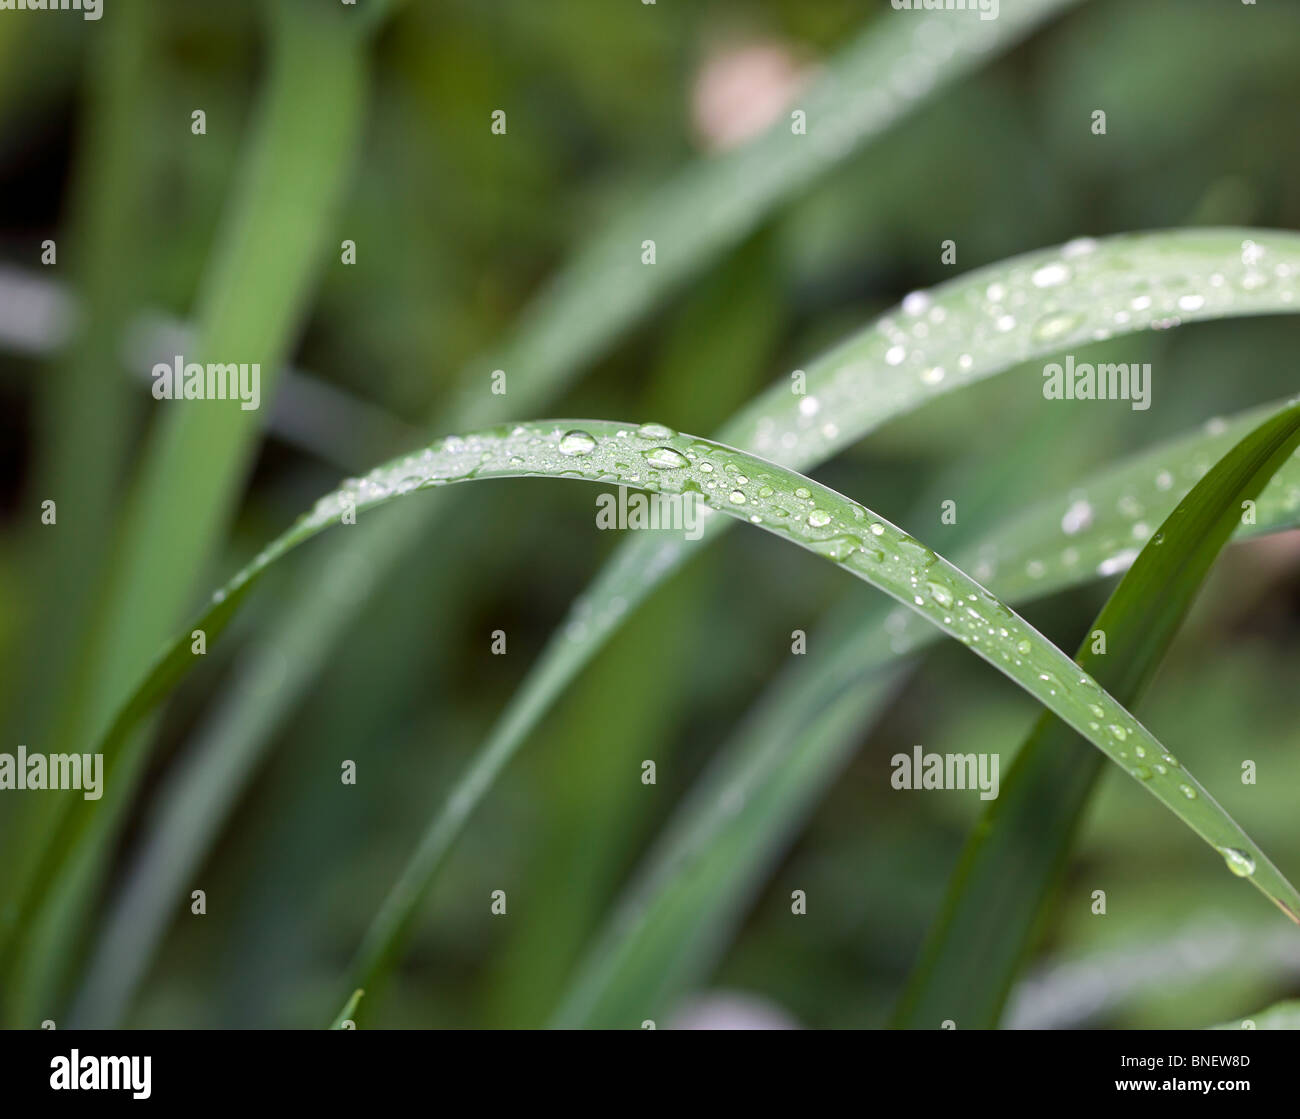 Beads of water on plant leaves in Shakespeare's garden in Central Park, New York City Stock Photo